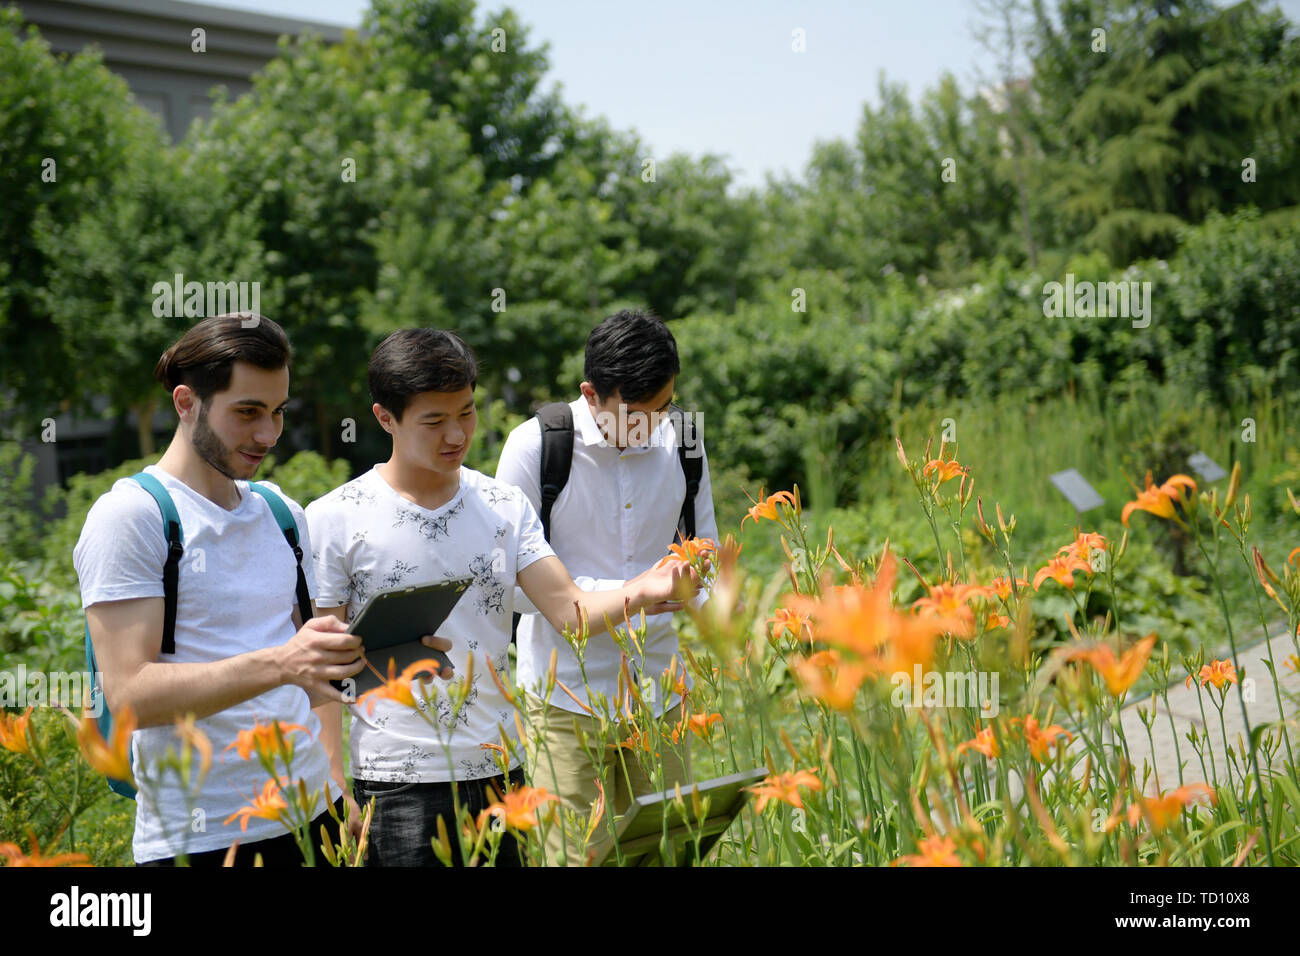 (190611) -- XI'AN, June 11, 2019 (Xinhua) -- Aushev Djamaleil (1st L) observes herbal plants in Shaanxi University of Chinese Medicine in northwest China's Shaanxi Province, June 10, 2019. Aushev Djamaleil, a Kazakhstani student from School of International Education in Shaanxi University of Chinese Medicine, has almost finished his undergraduate study in acupuncture & moxibustion and massage, and will pursue his master degree in the same major. He wishes traditional Chinese medicine, through his efforts, can be applied to more patients in his home country.     A total of 121 students from 15  Stock Photo